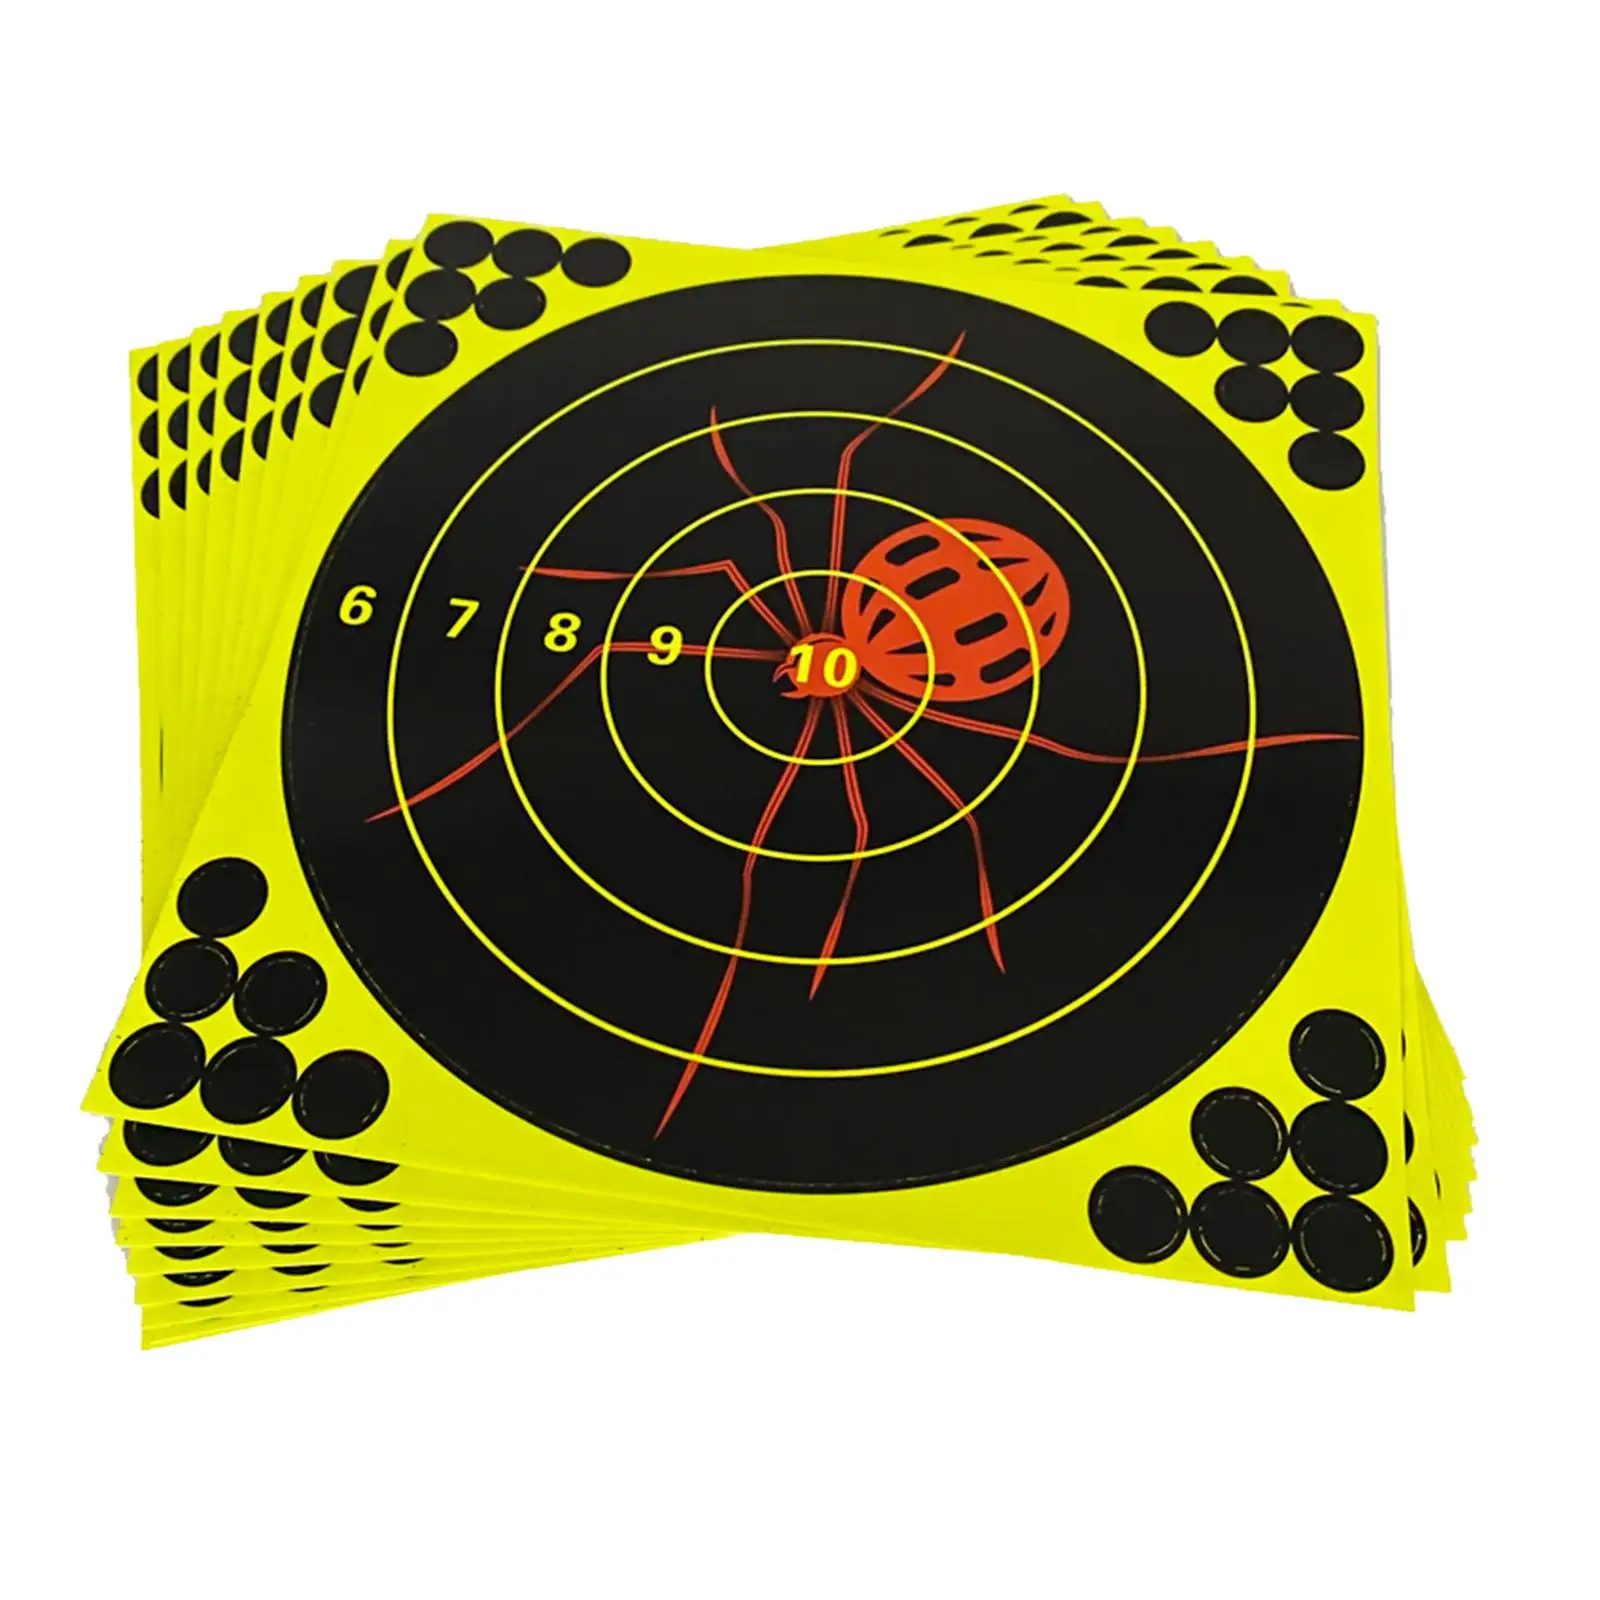 10x Shooting Paper Target Long Distance Splatter for Bow Shooting Practice